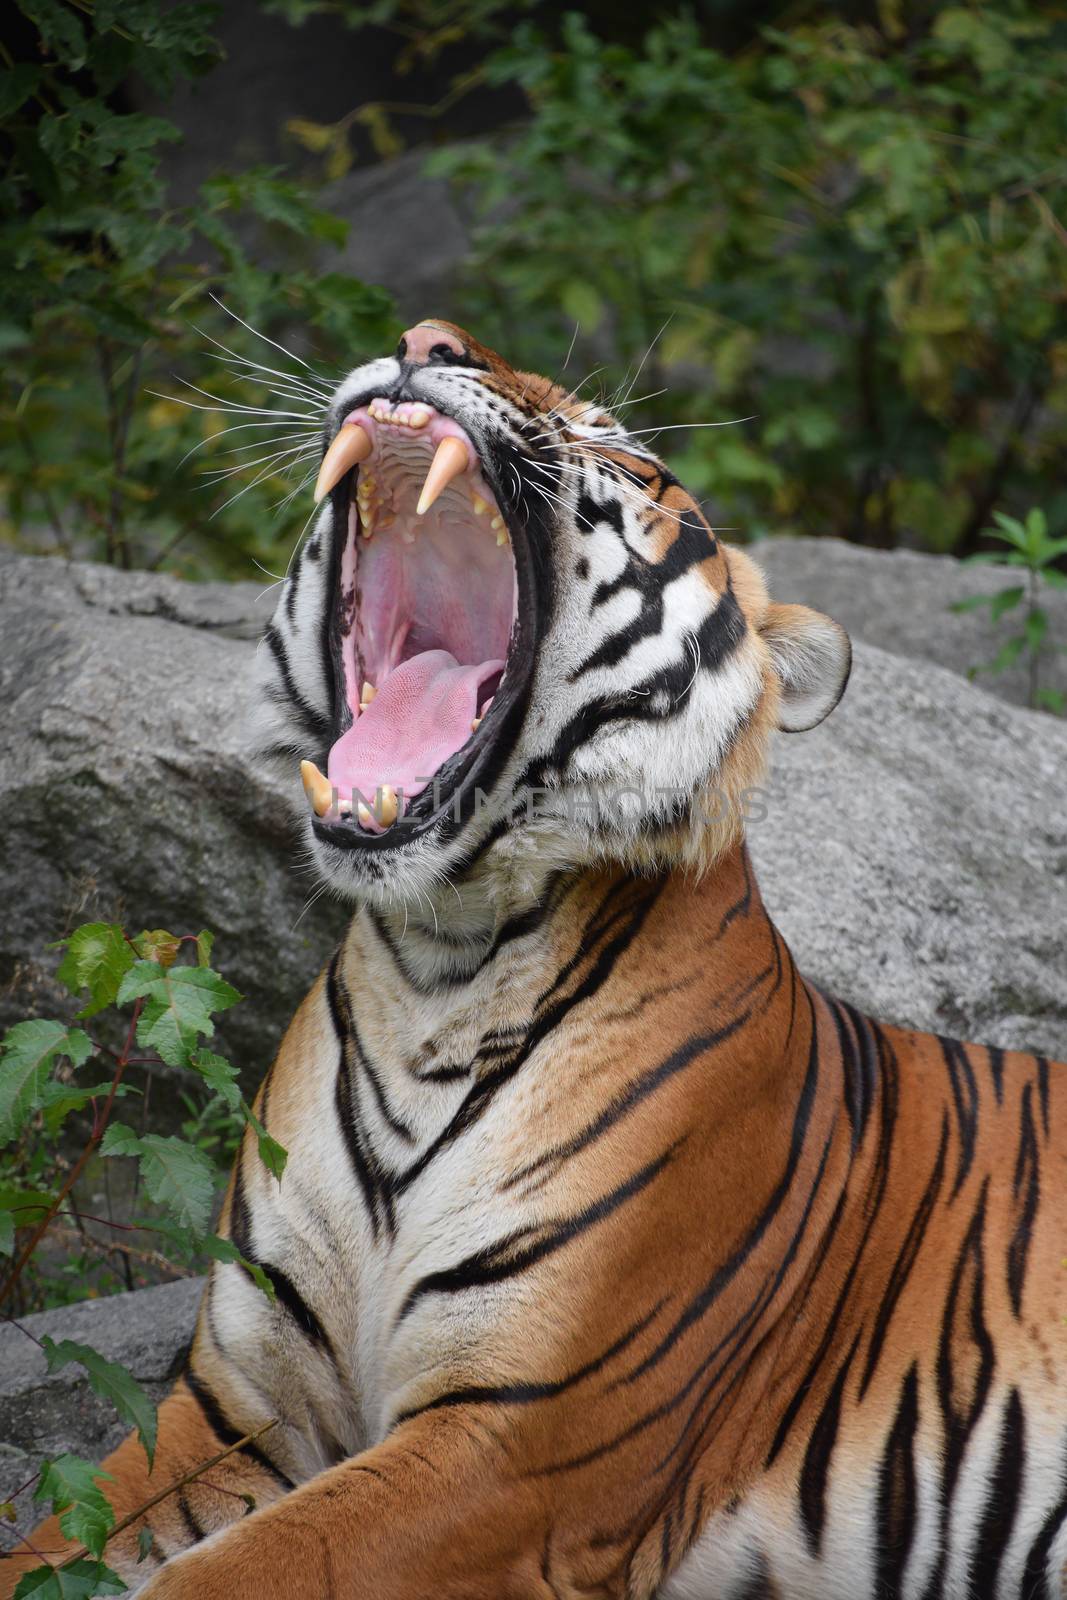 Close up profile portrait of one Indochinese tiger yawning or roaring, mouth wide open and showing teeth, low angle view